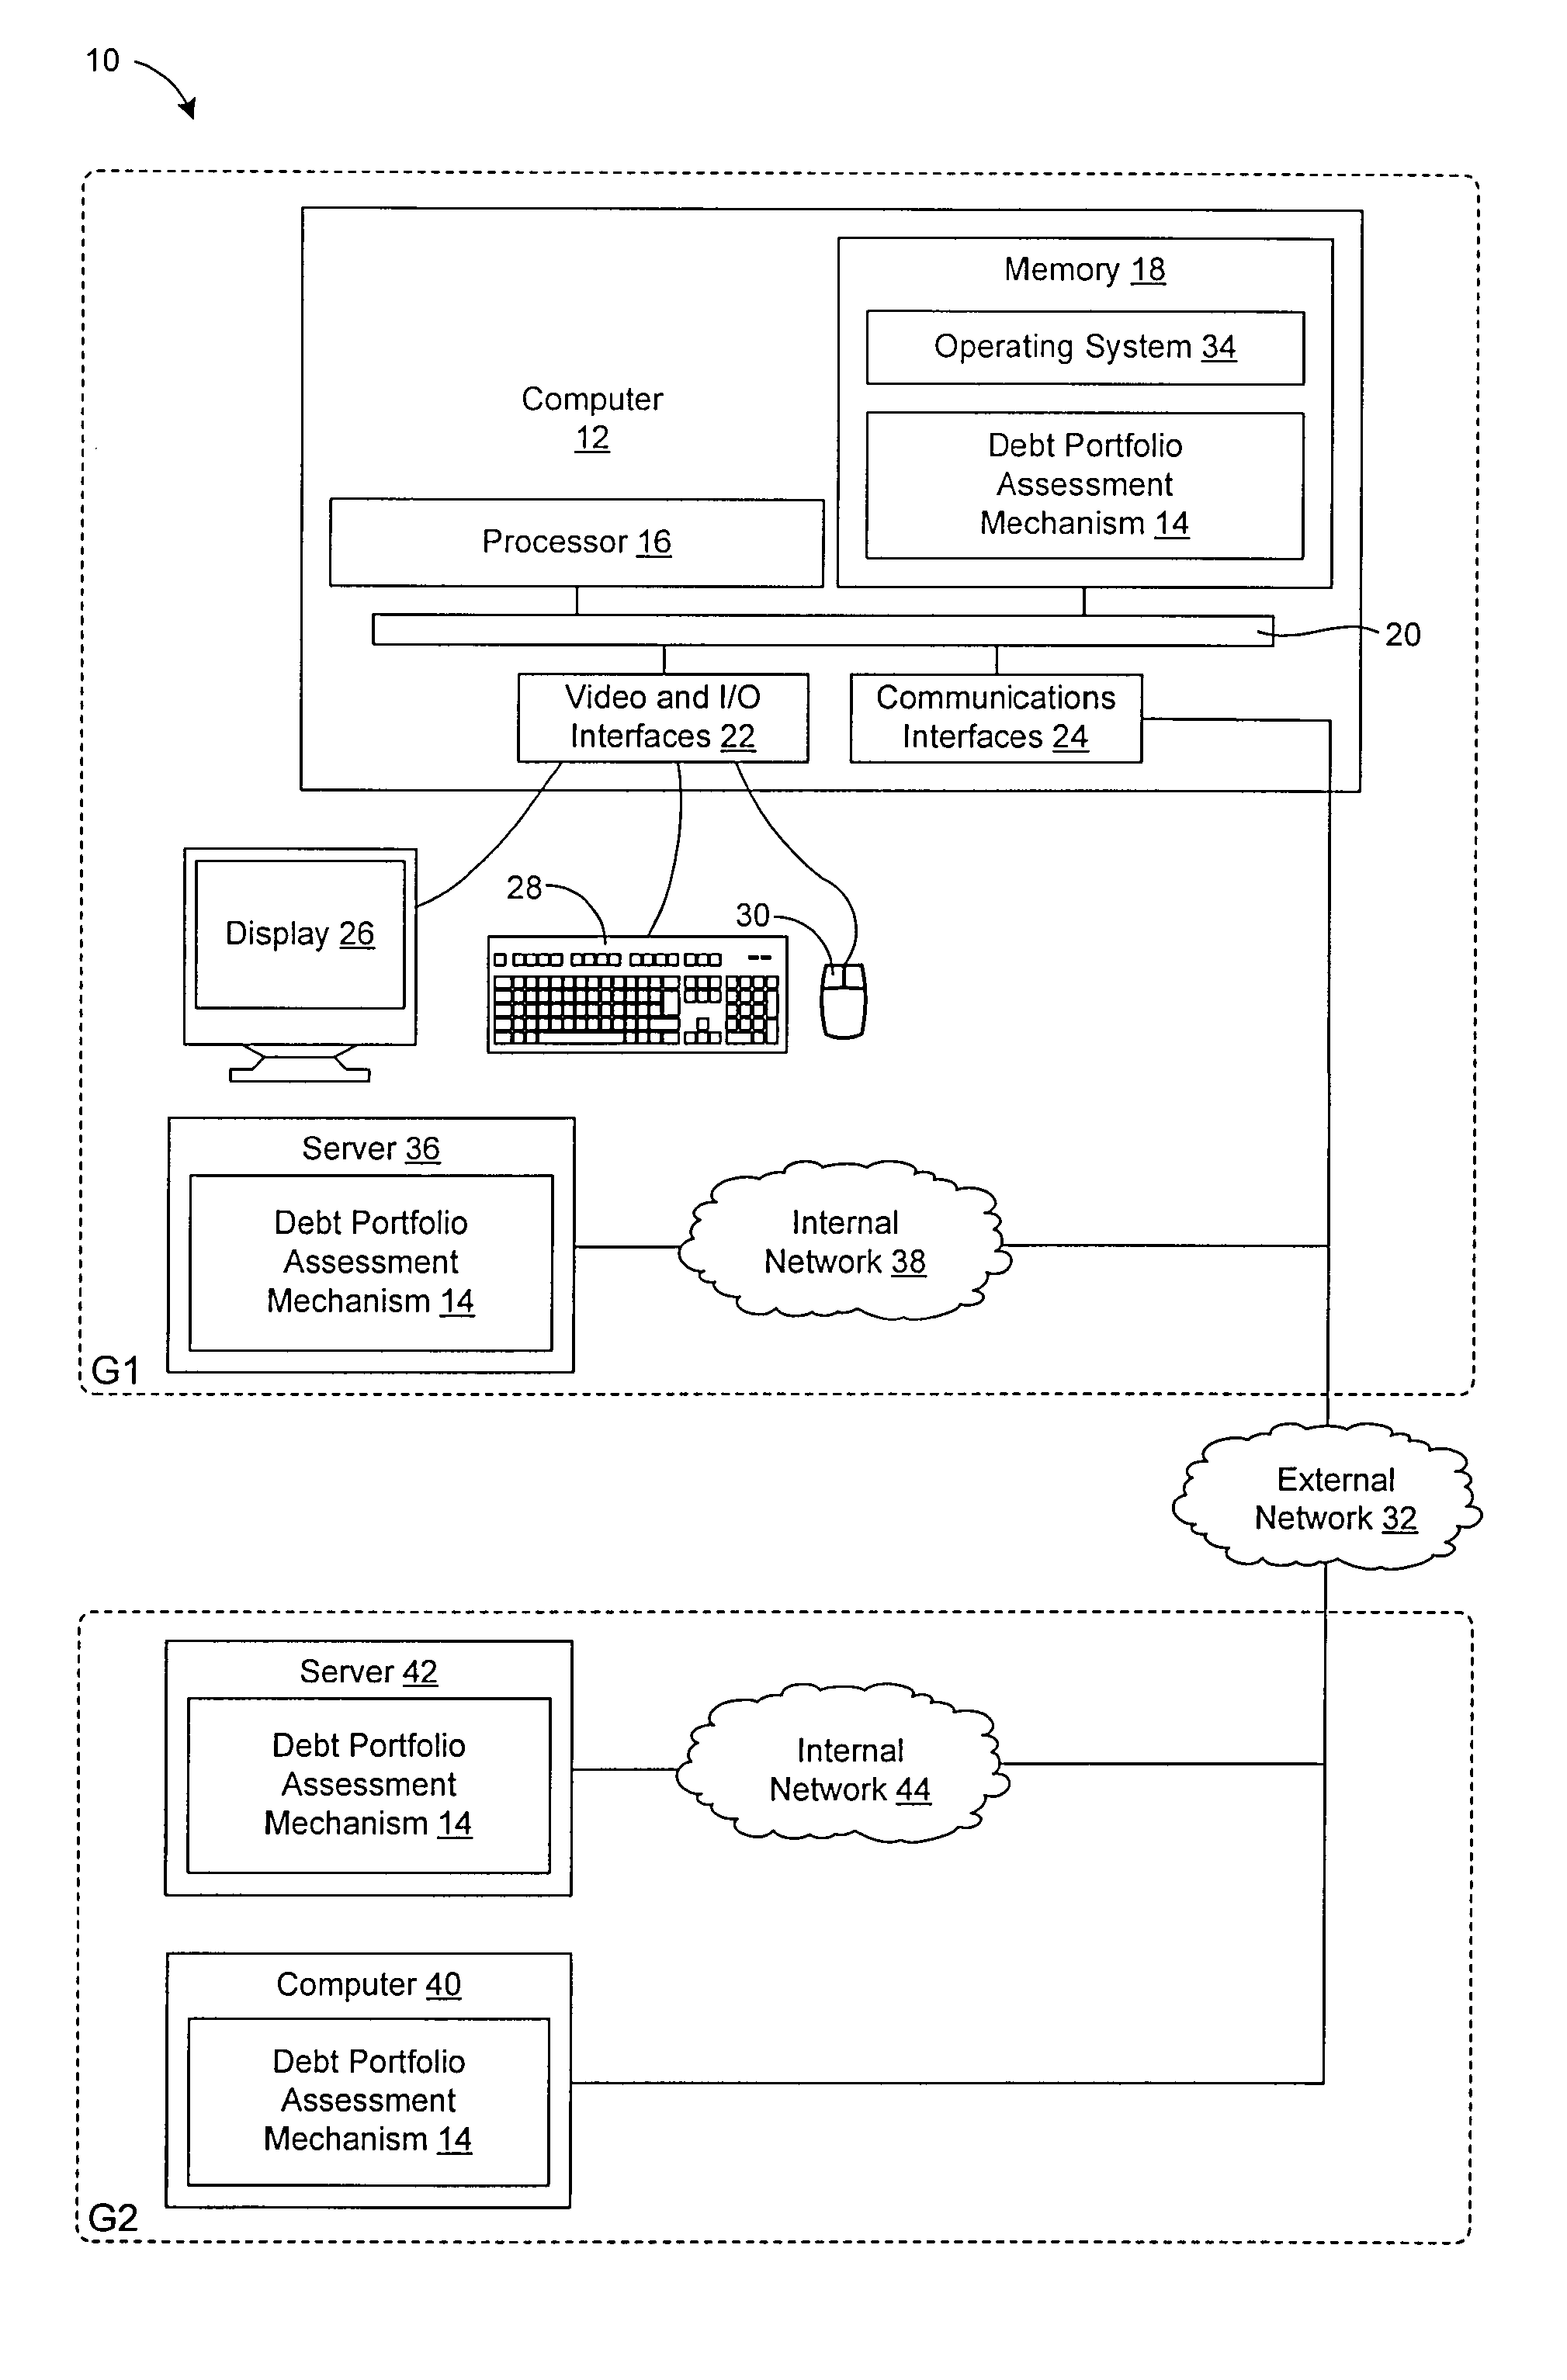 System and method for debt valuation